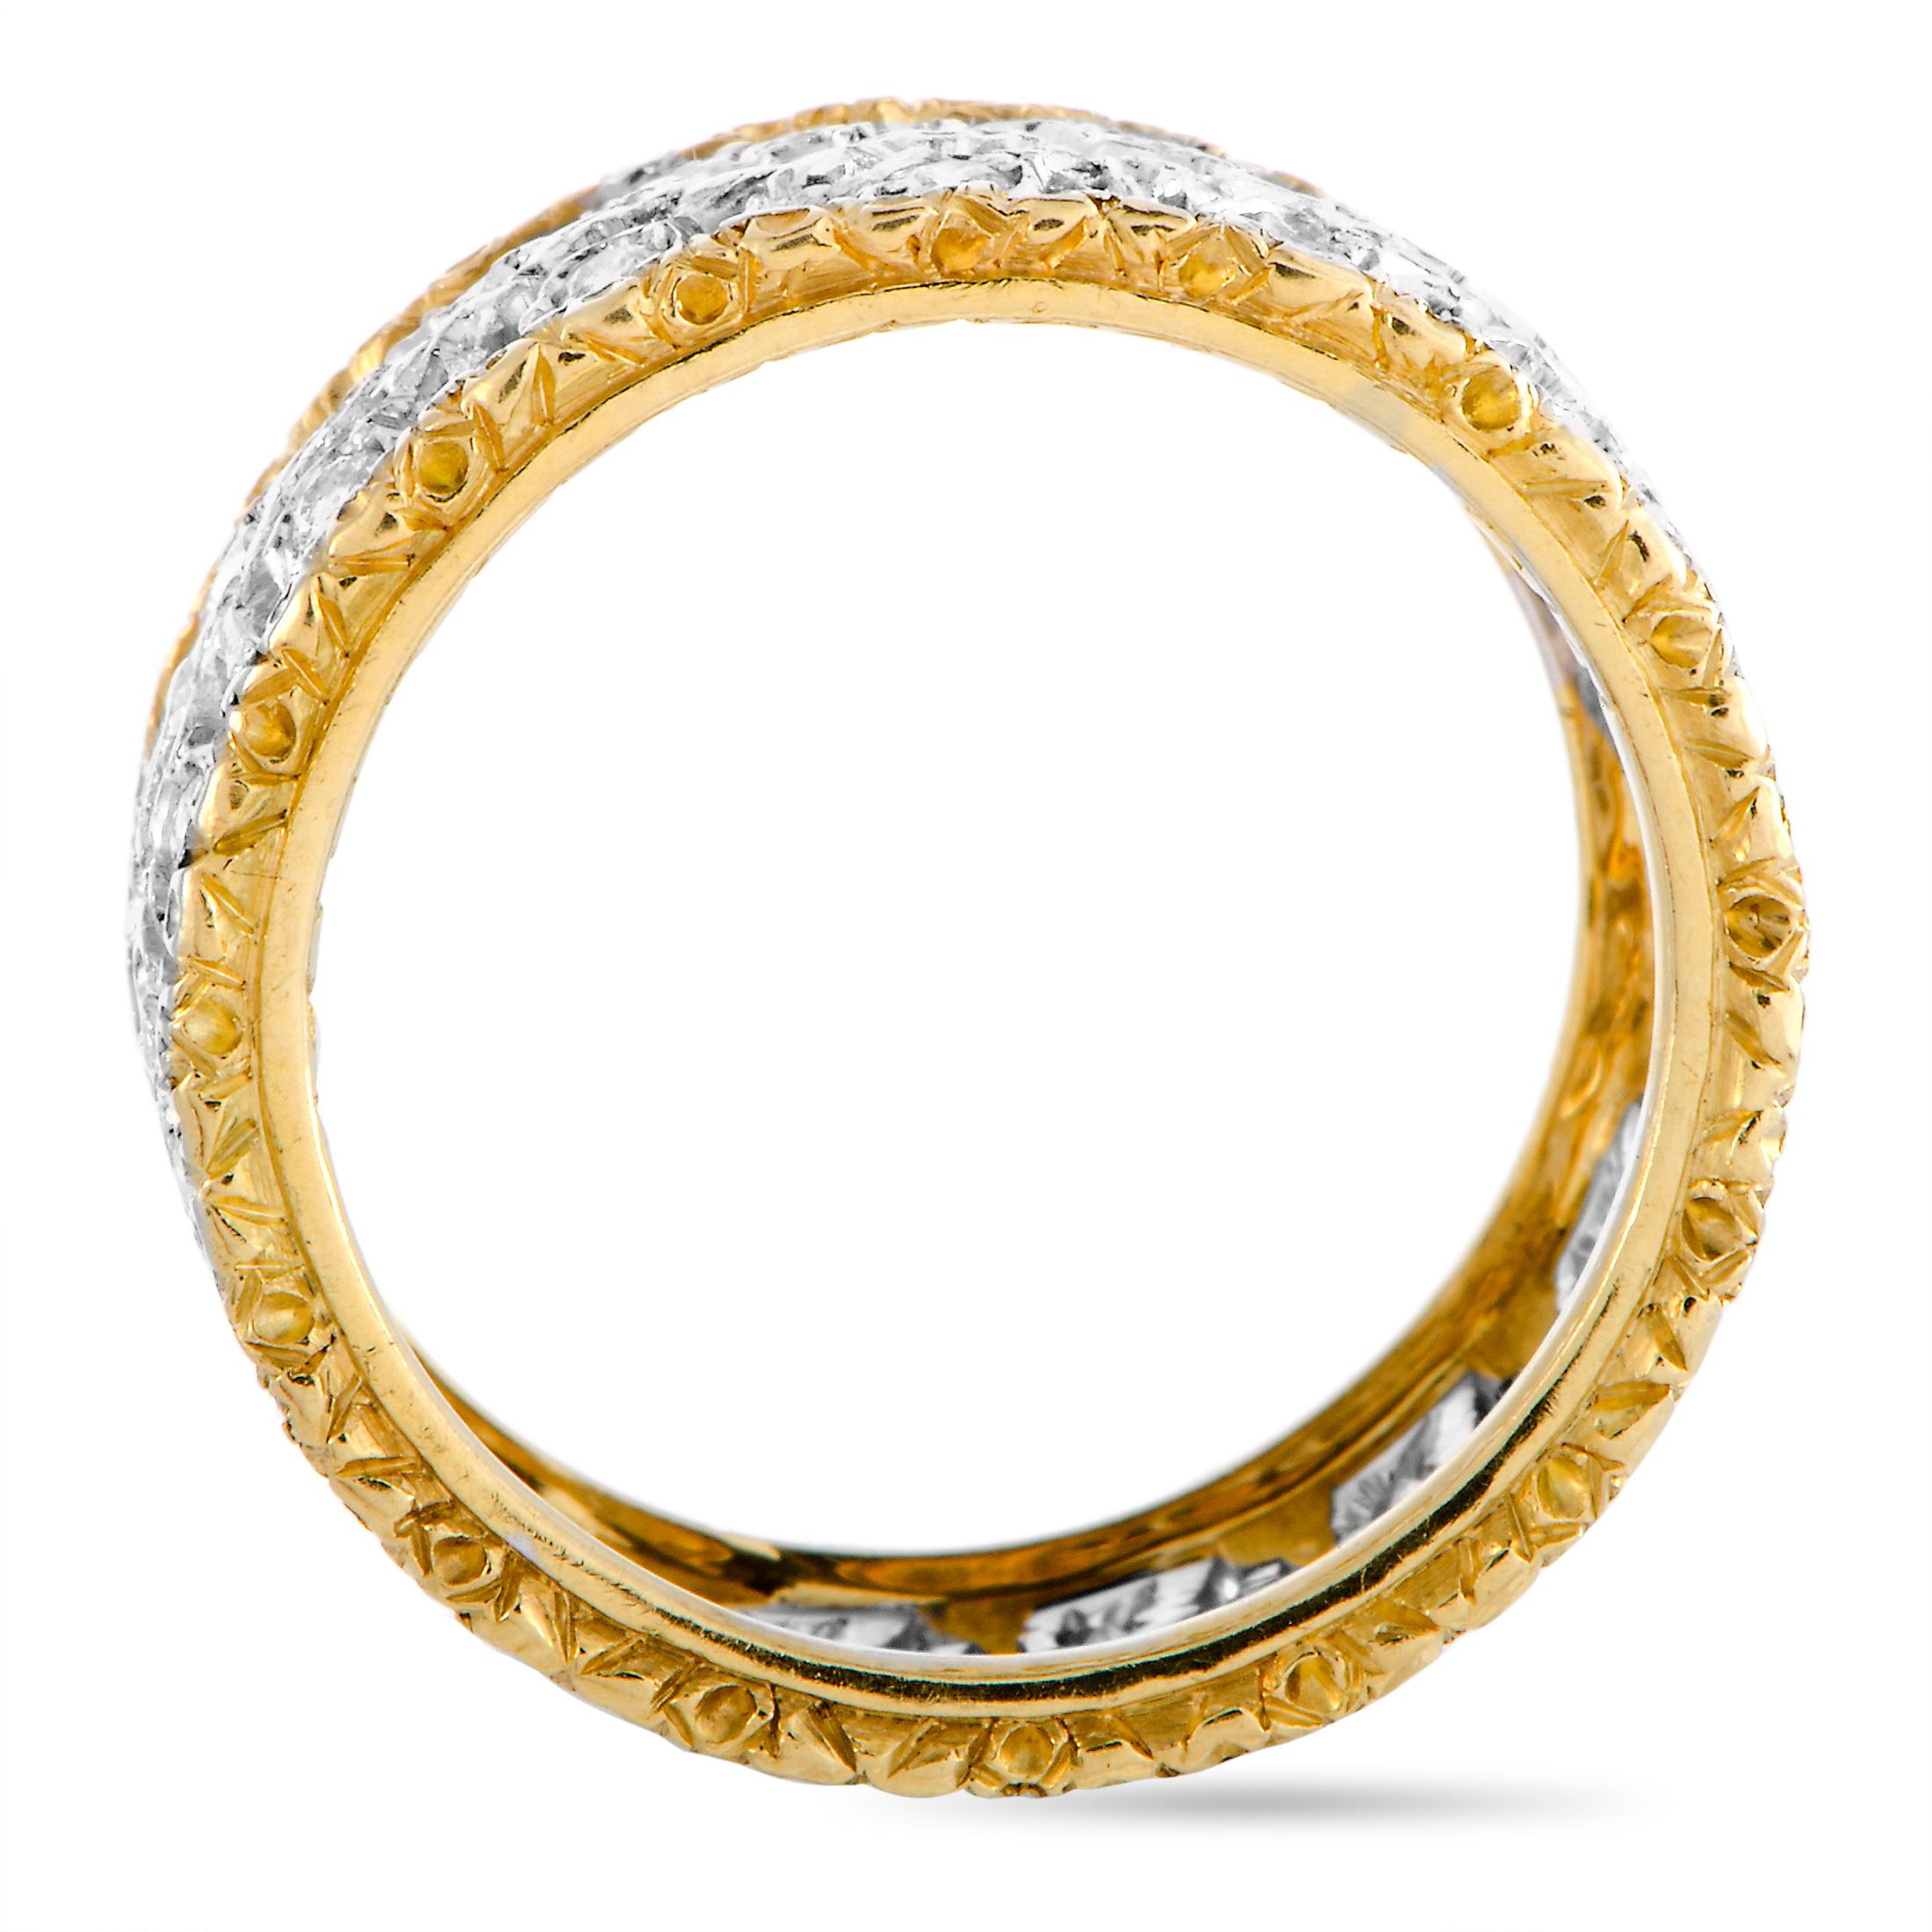 The Buccellati “Éternelle” wedding band is made out of 18K white and yellow gold and weighs 6 grams, boasting band thickness of 10 mm. The ring is embellished with diamonds that amount to 0.65 carats.

This item is offered in estate condition and